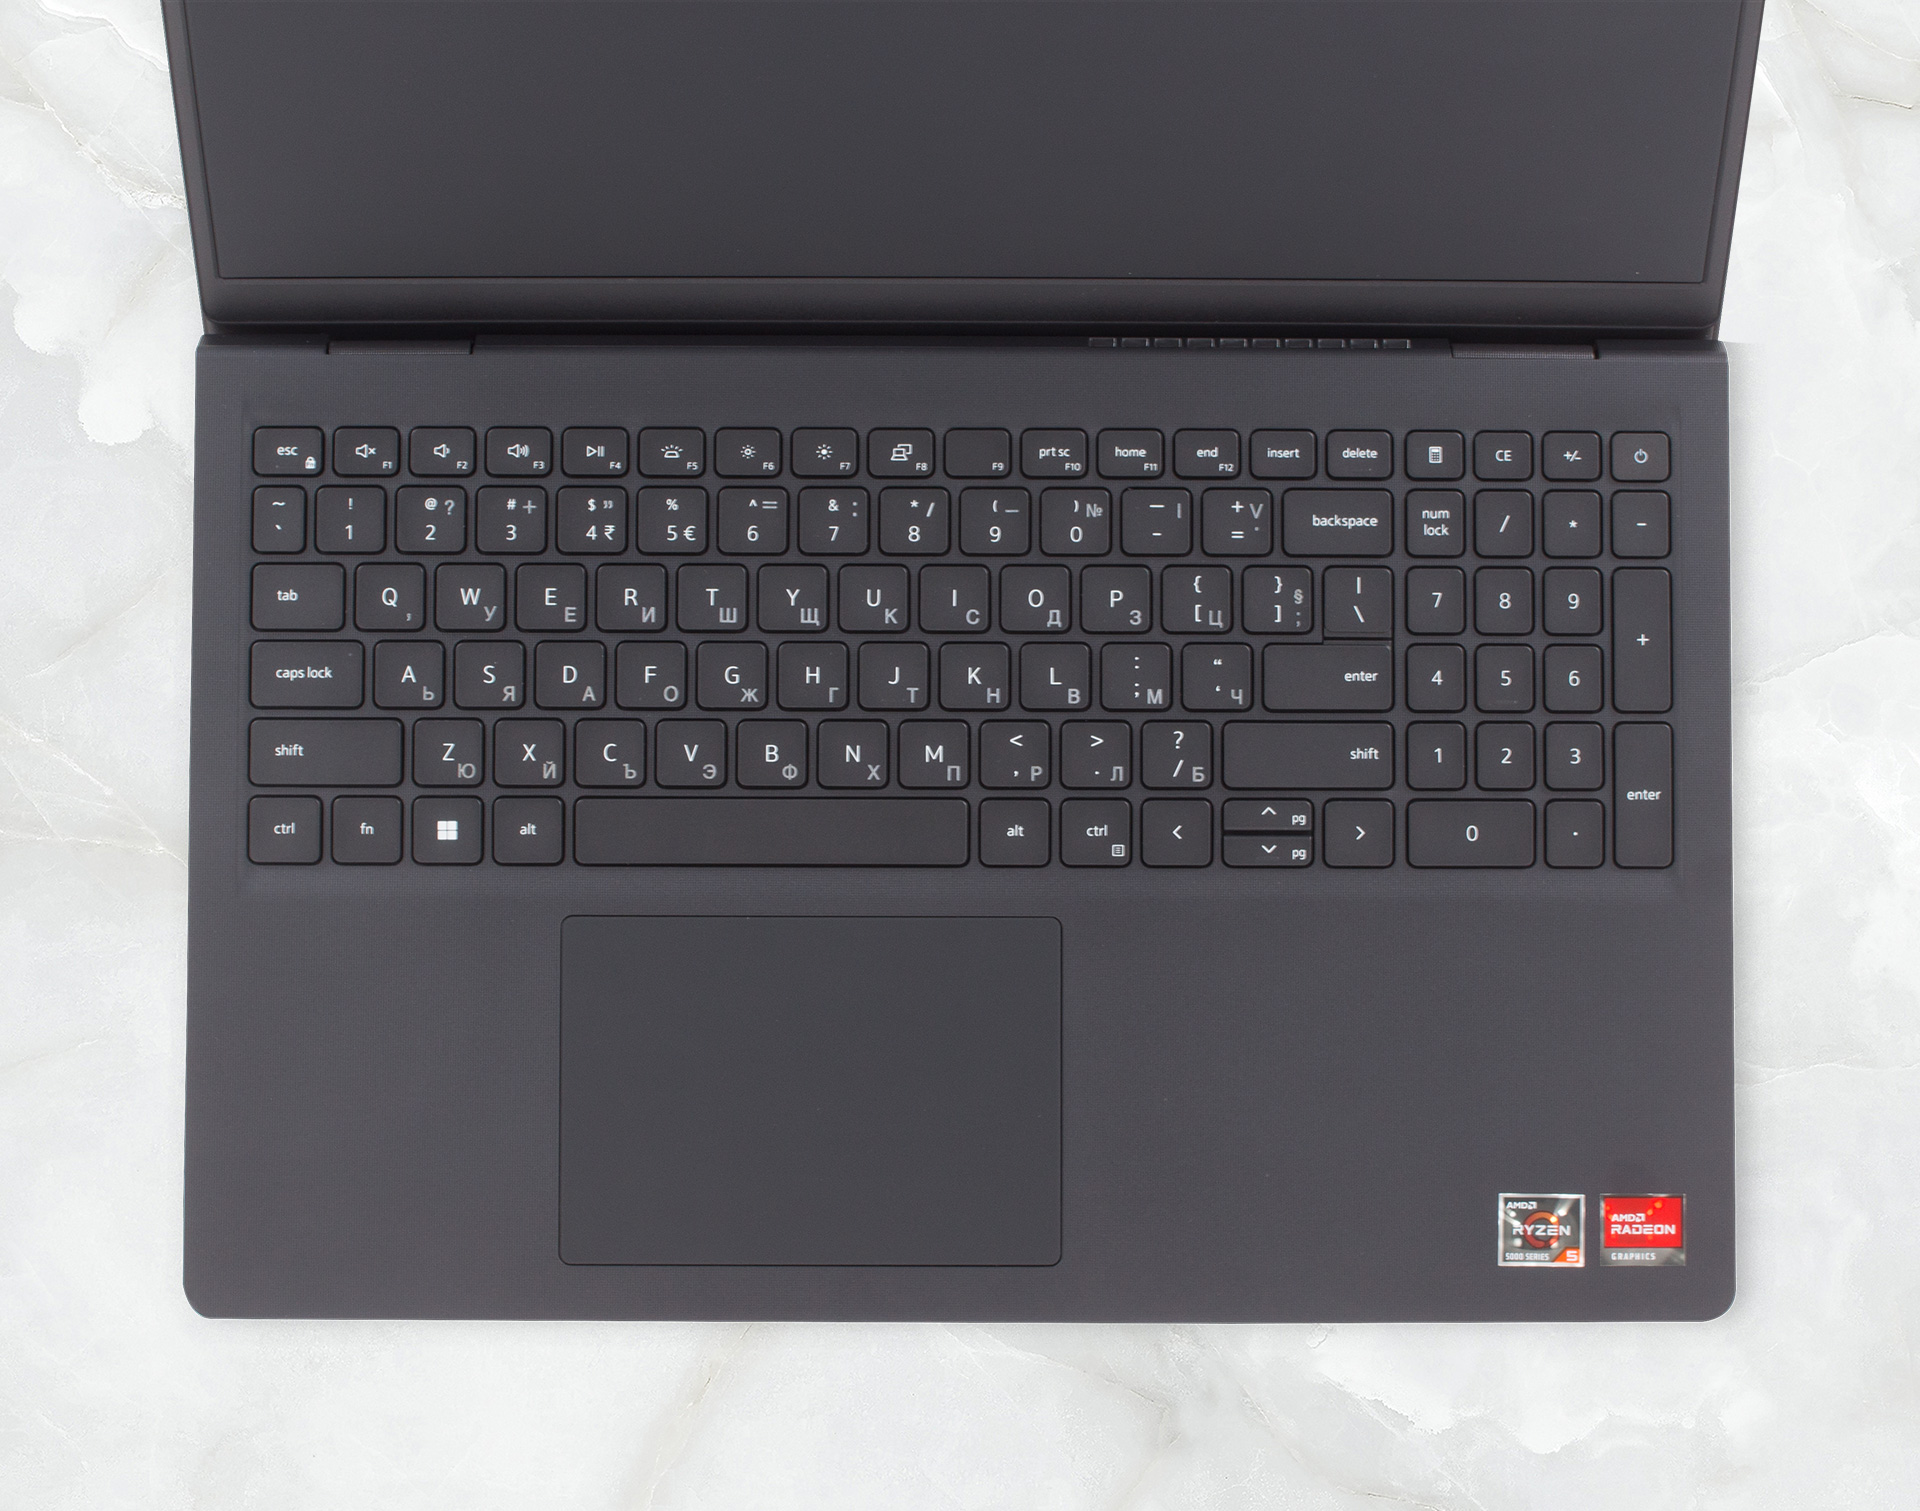 Dell Vostro 15 3525 - Top 5 Pros and Cons | LaptopMedia UK